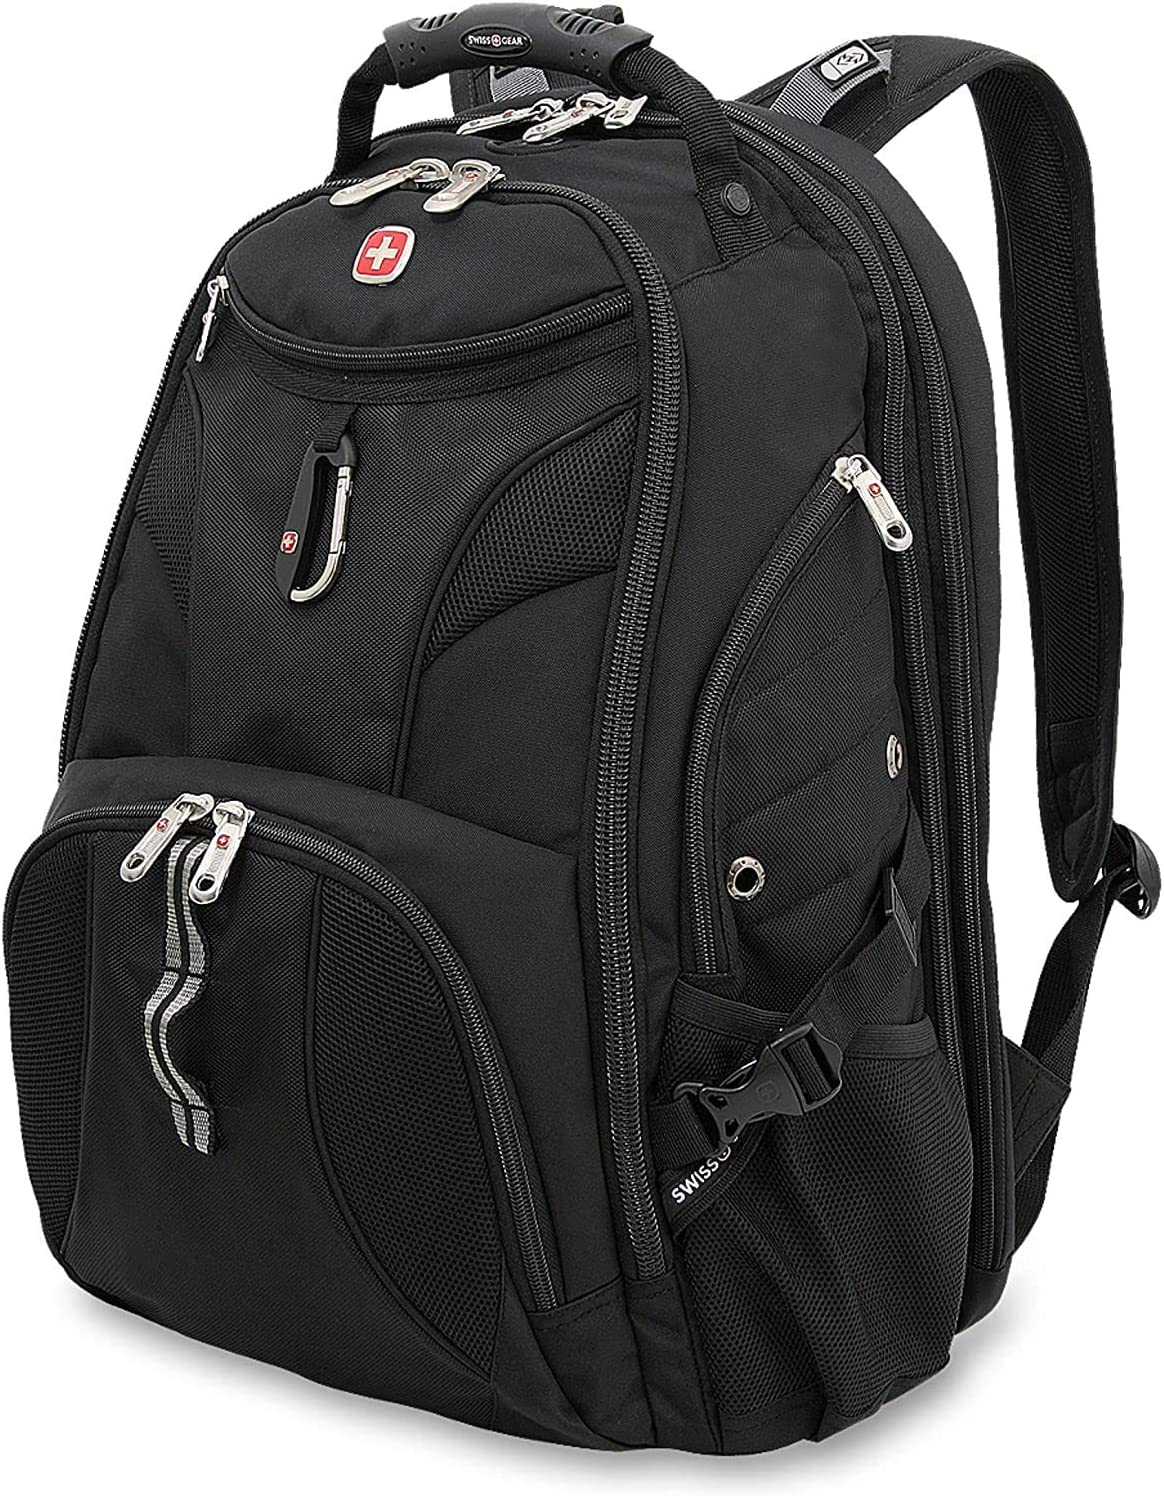 commuter laptop backpack review